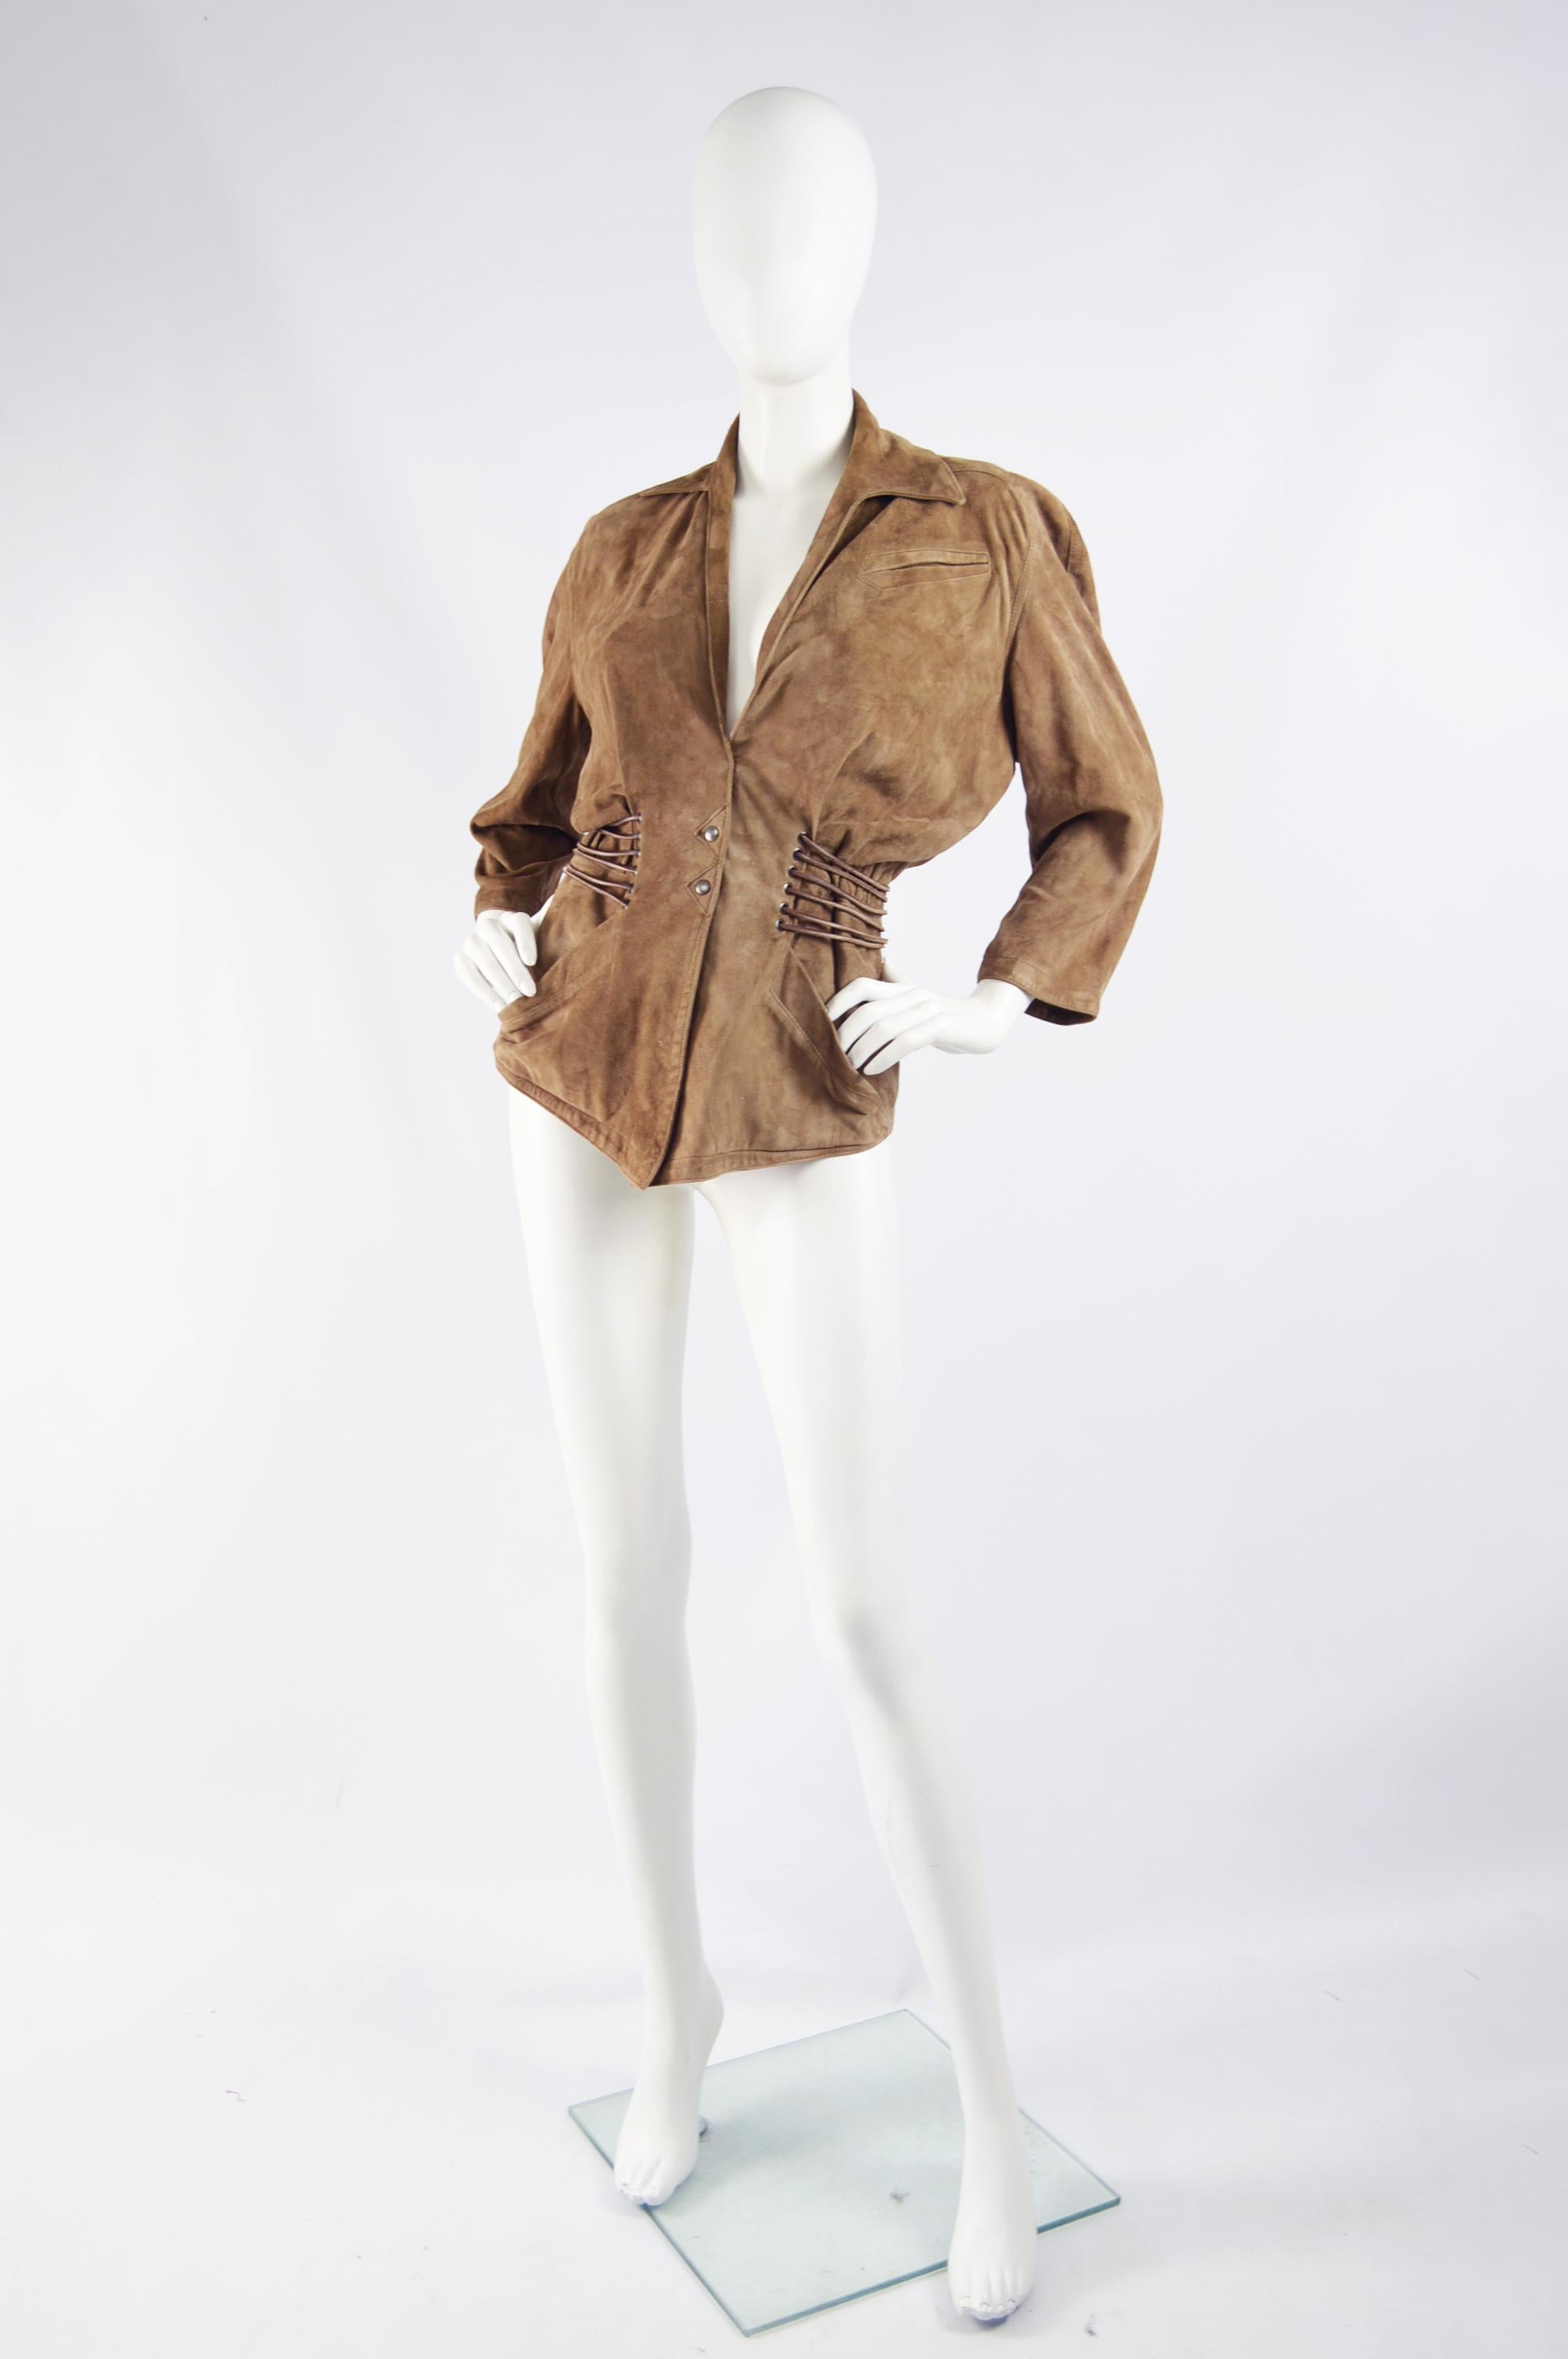 A rare and amazing vintage womens jacket from the 80s by Thierry Mugler. In a brown suede with a nipped waist and batwing sleeves. 

Size: Unlabelled; fits like a UK 6/ US 2/ EU 34. Please check measurements. 
Bust - 40” / 101cm
Underbust - 26” /